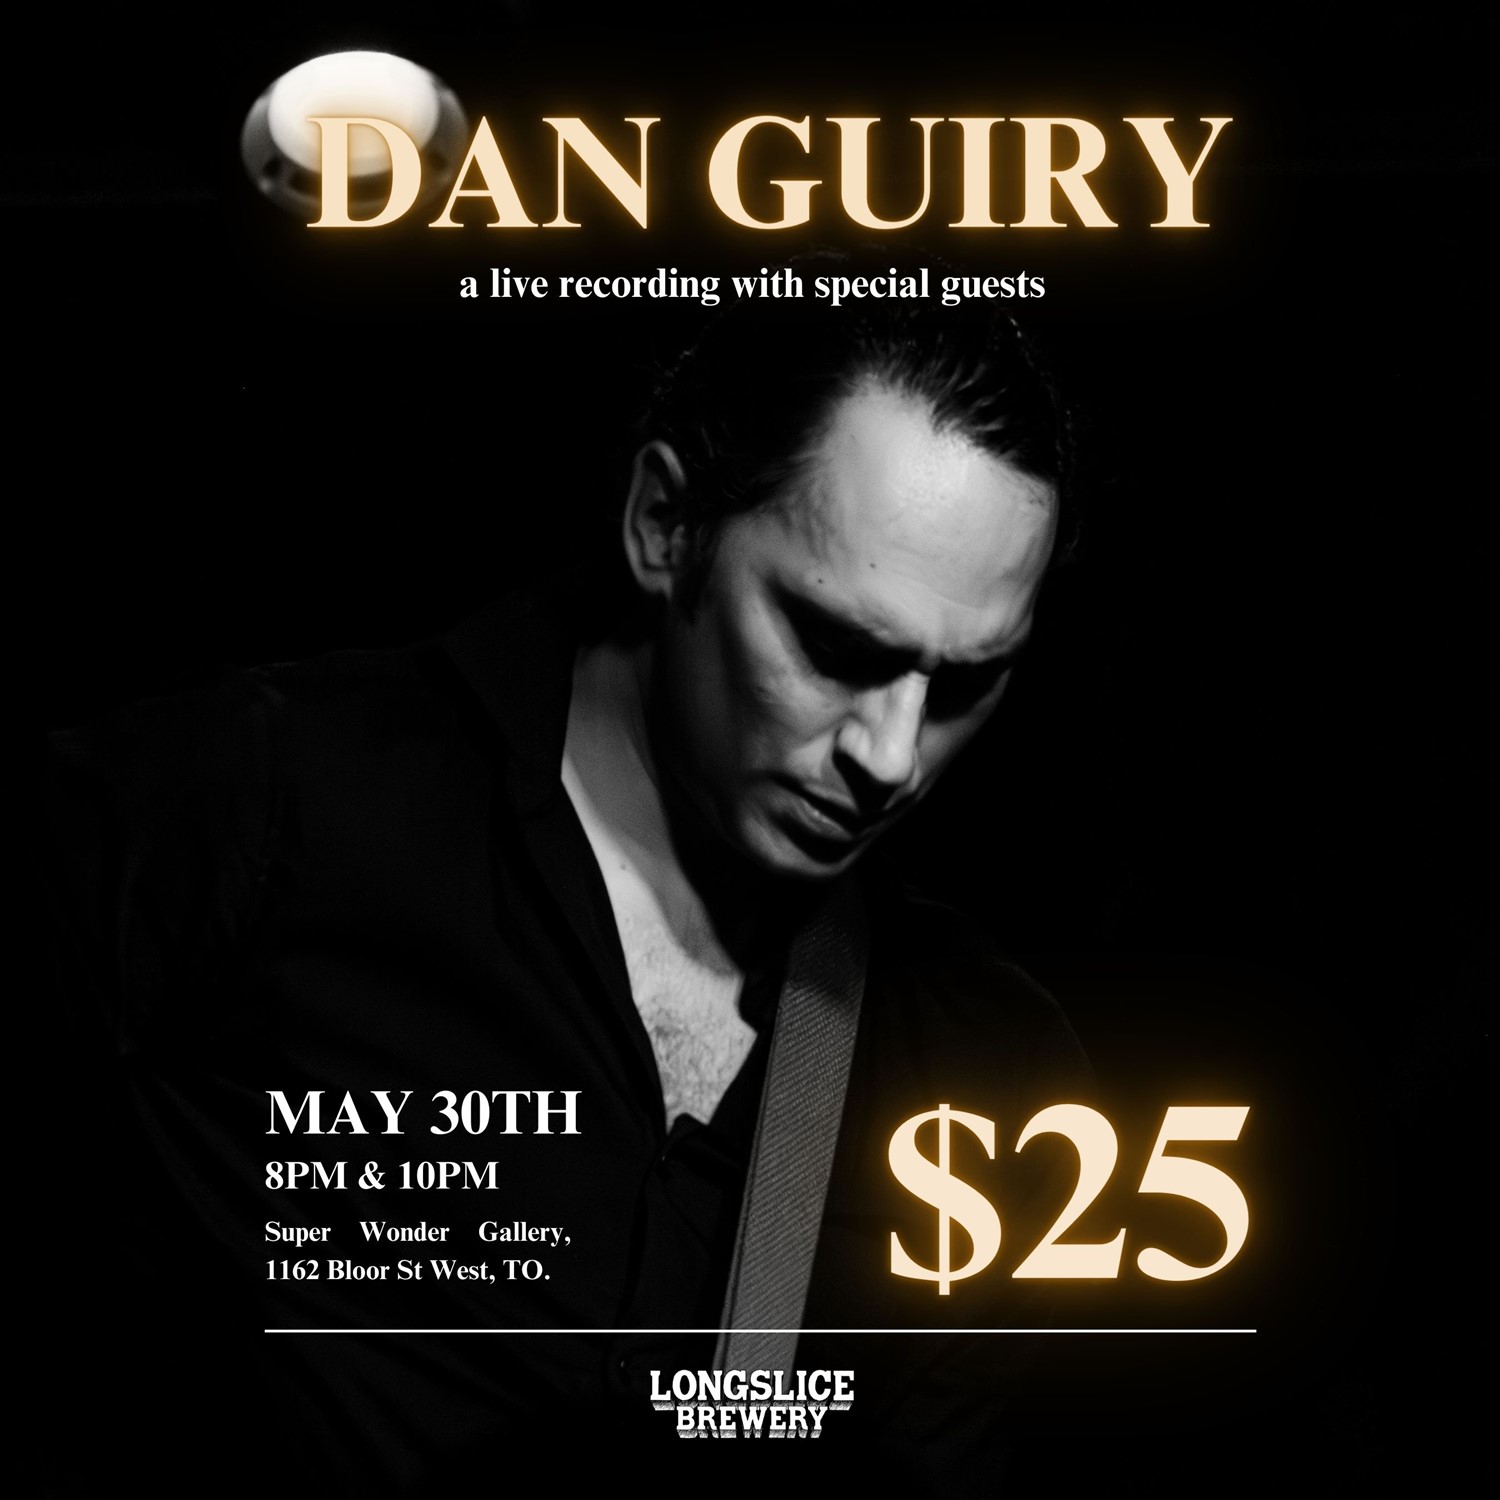 DAN GUIRY COMEDY SPECIAL 10pm on May 30, 22:00@SUPER WONDER GALLERY - Buy tickets and Get information on Super Wonder Gallery 